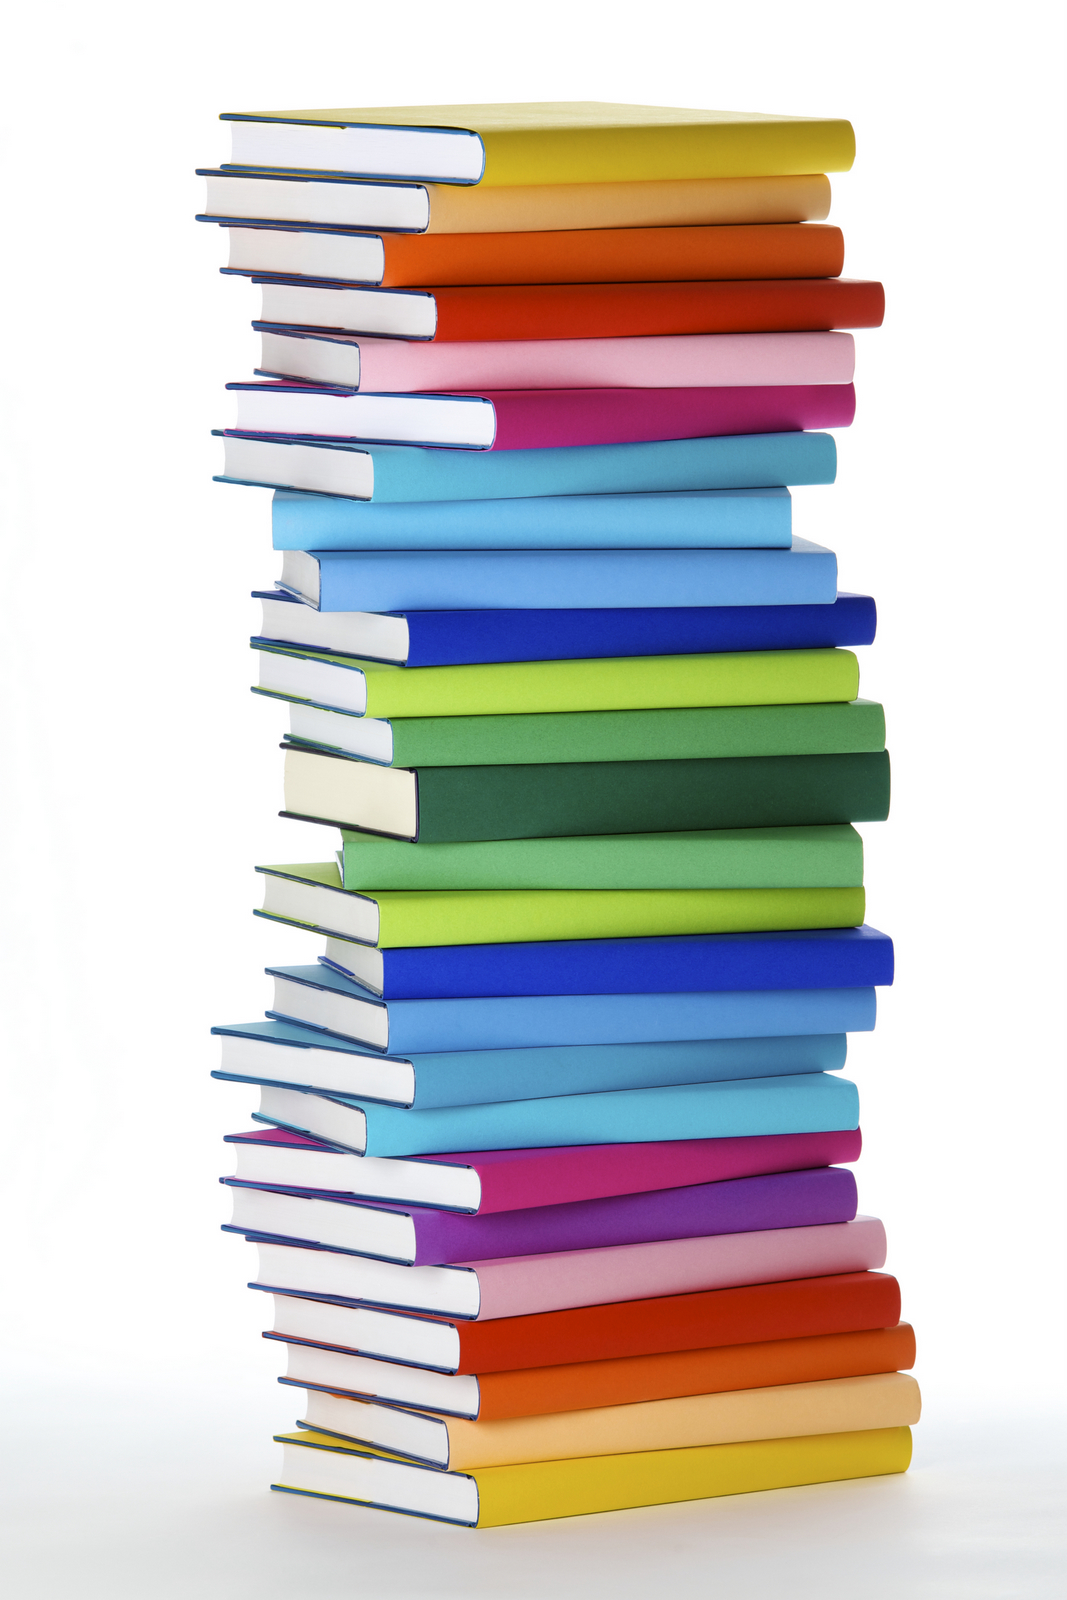 Stacks Of Books Images - Cliparts.co